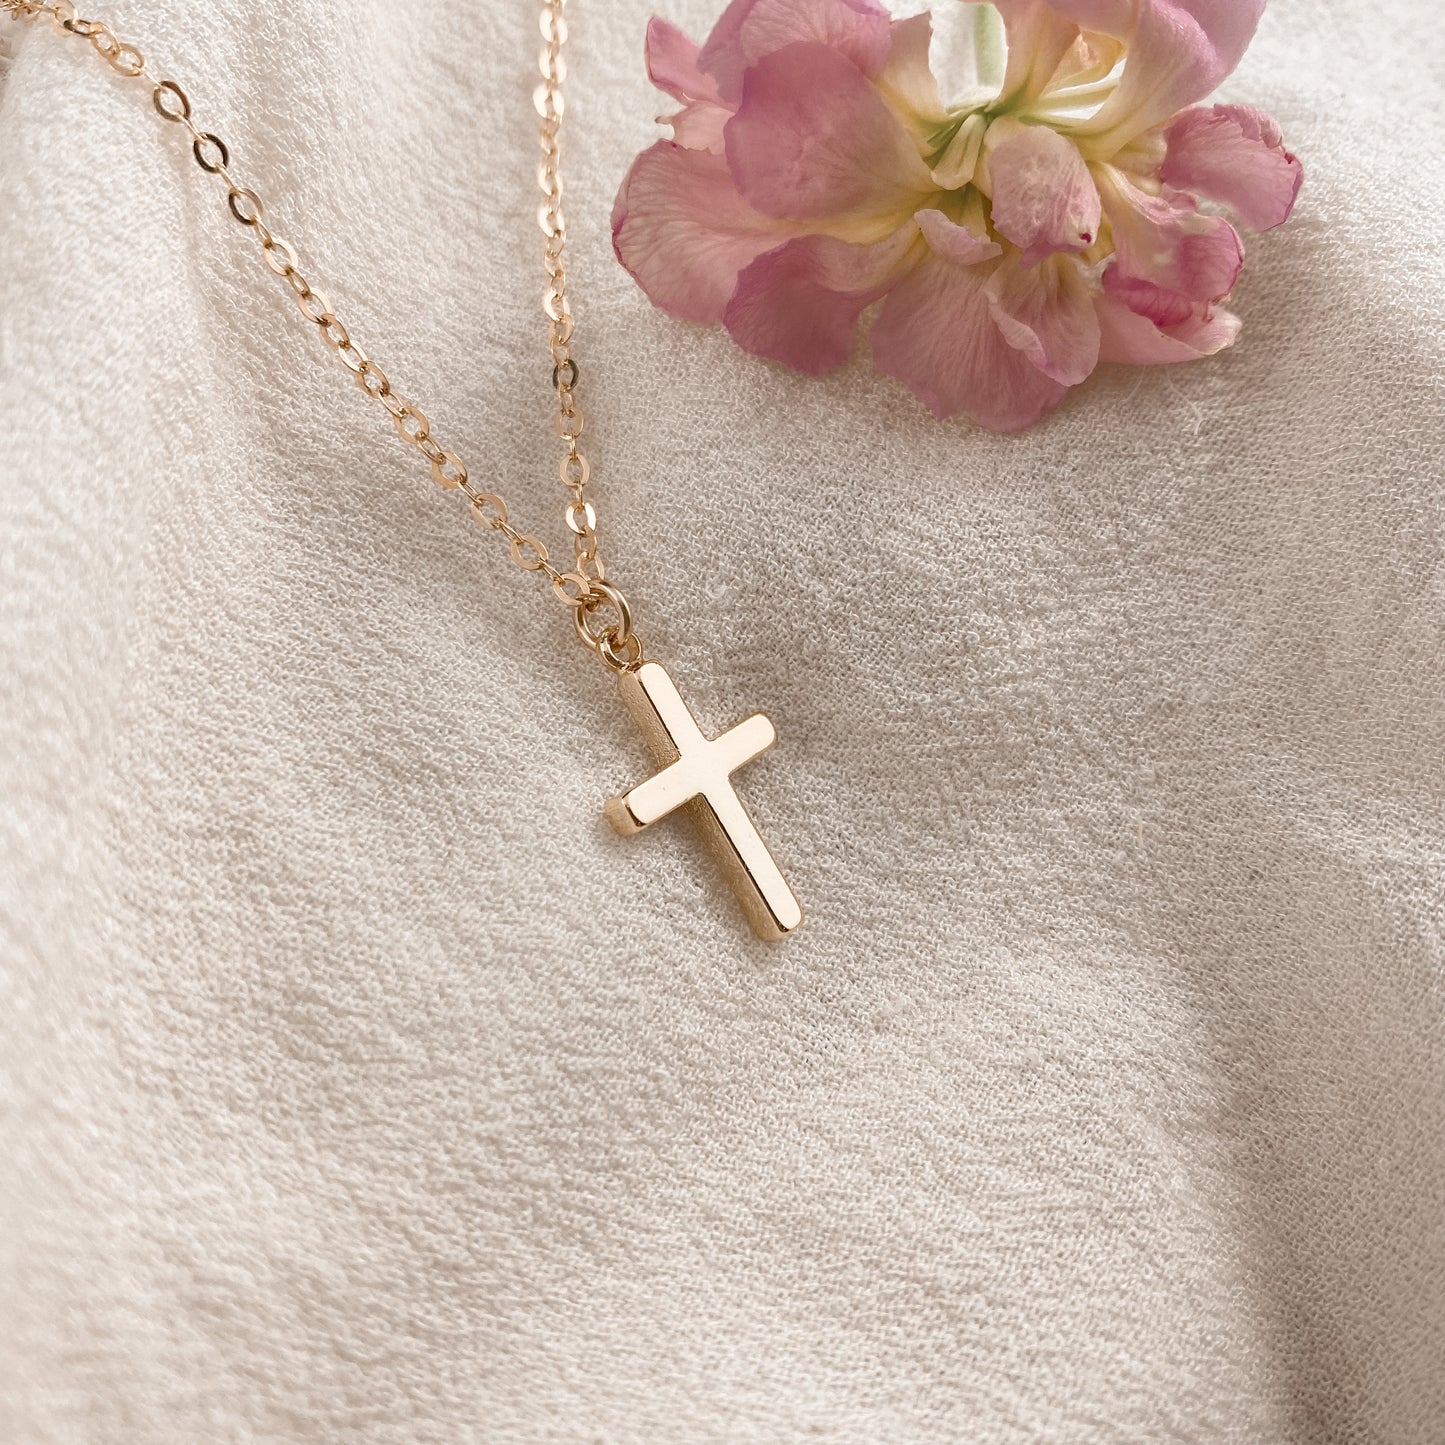 Small cross necklace - gold